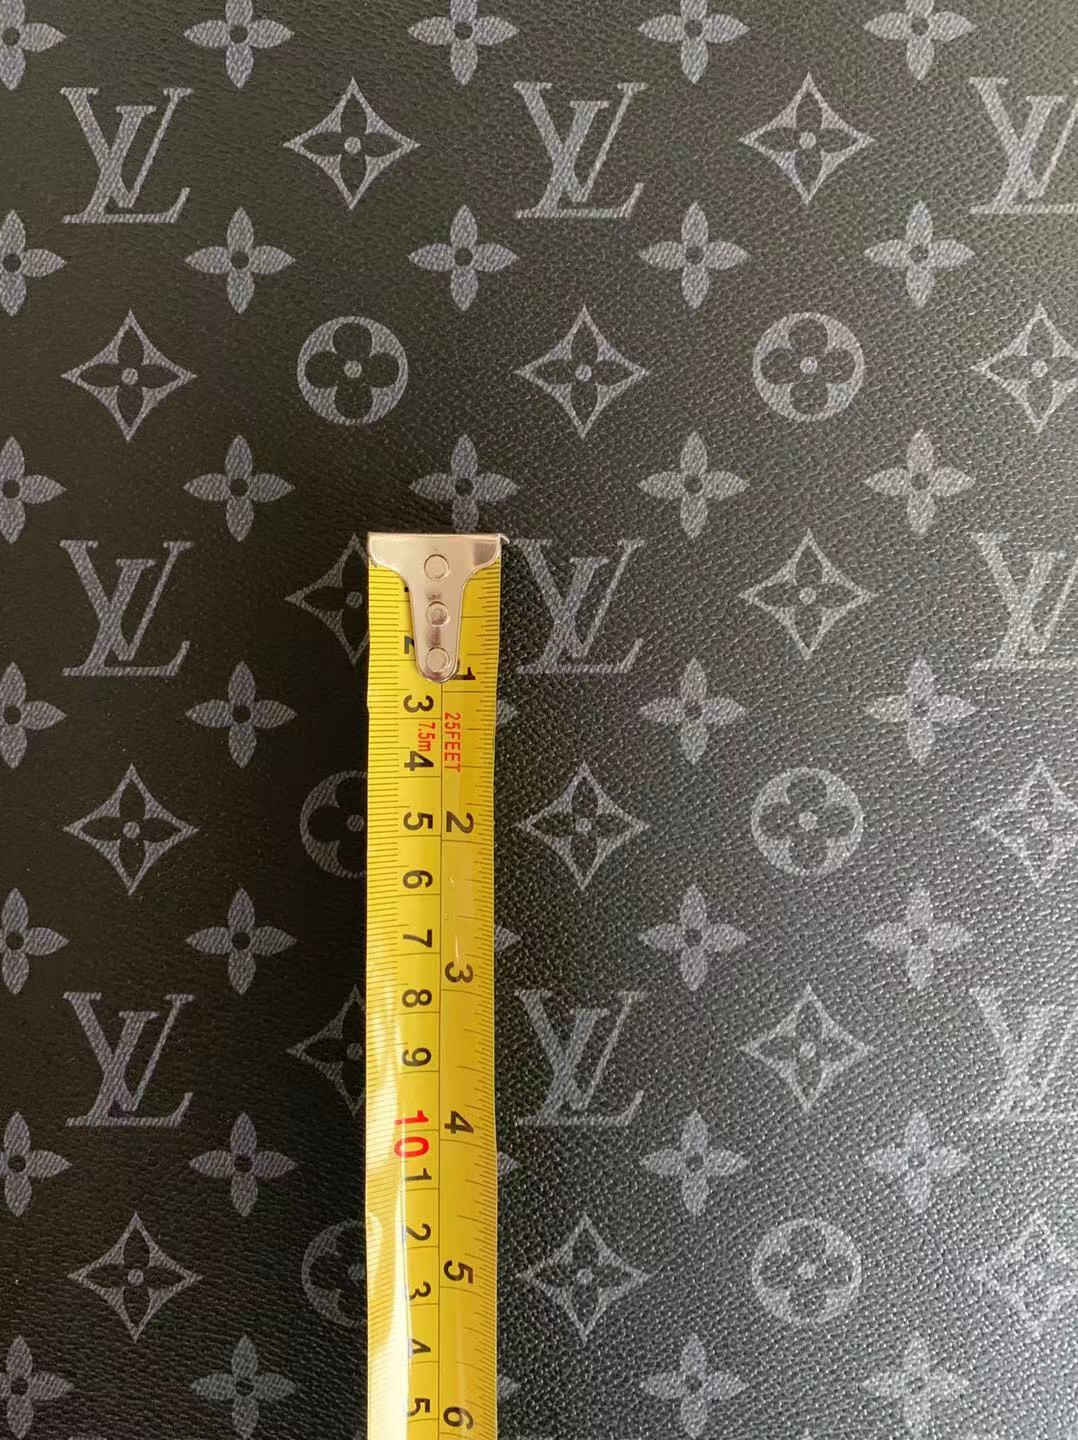 Louis Vuitton Leather Gray  Lv Leather Fabric By The Yard Gray